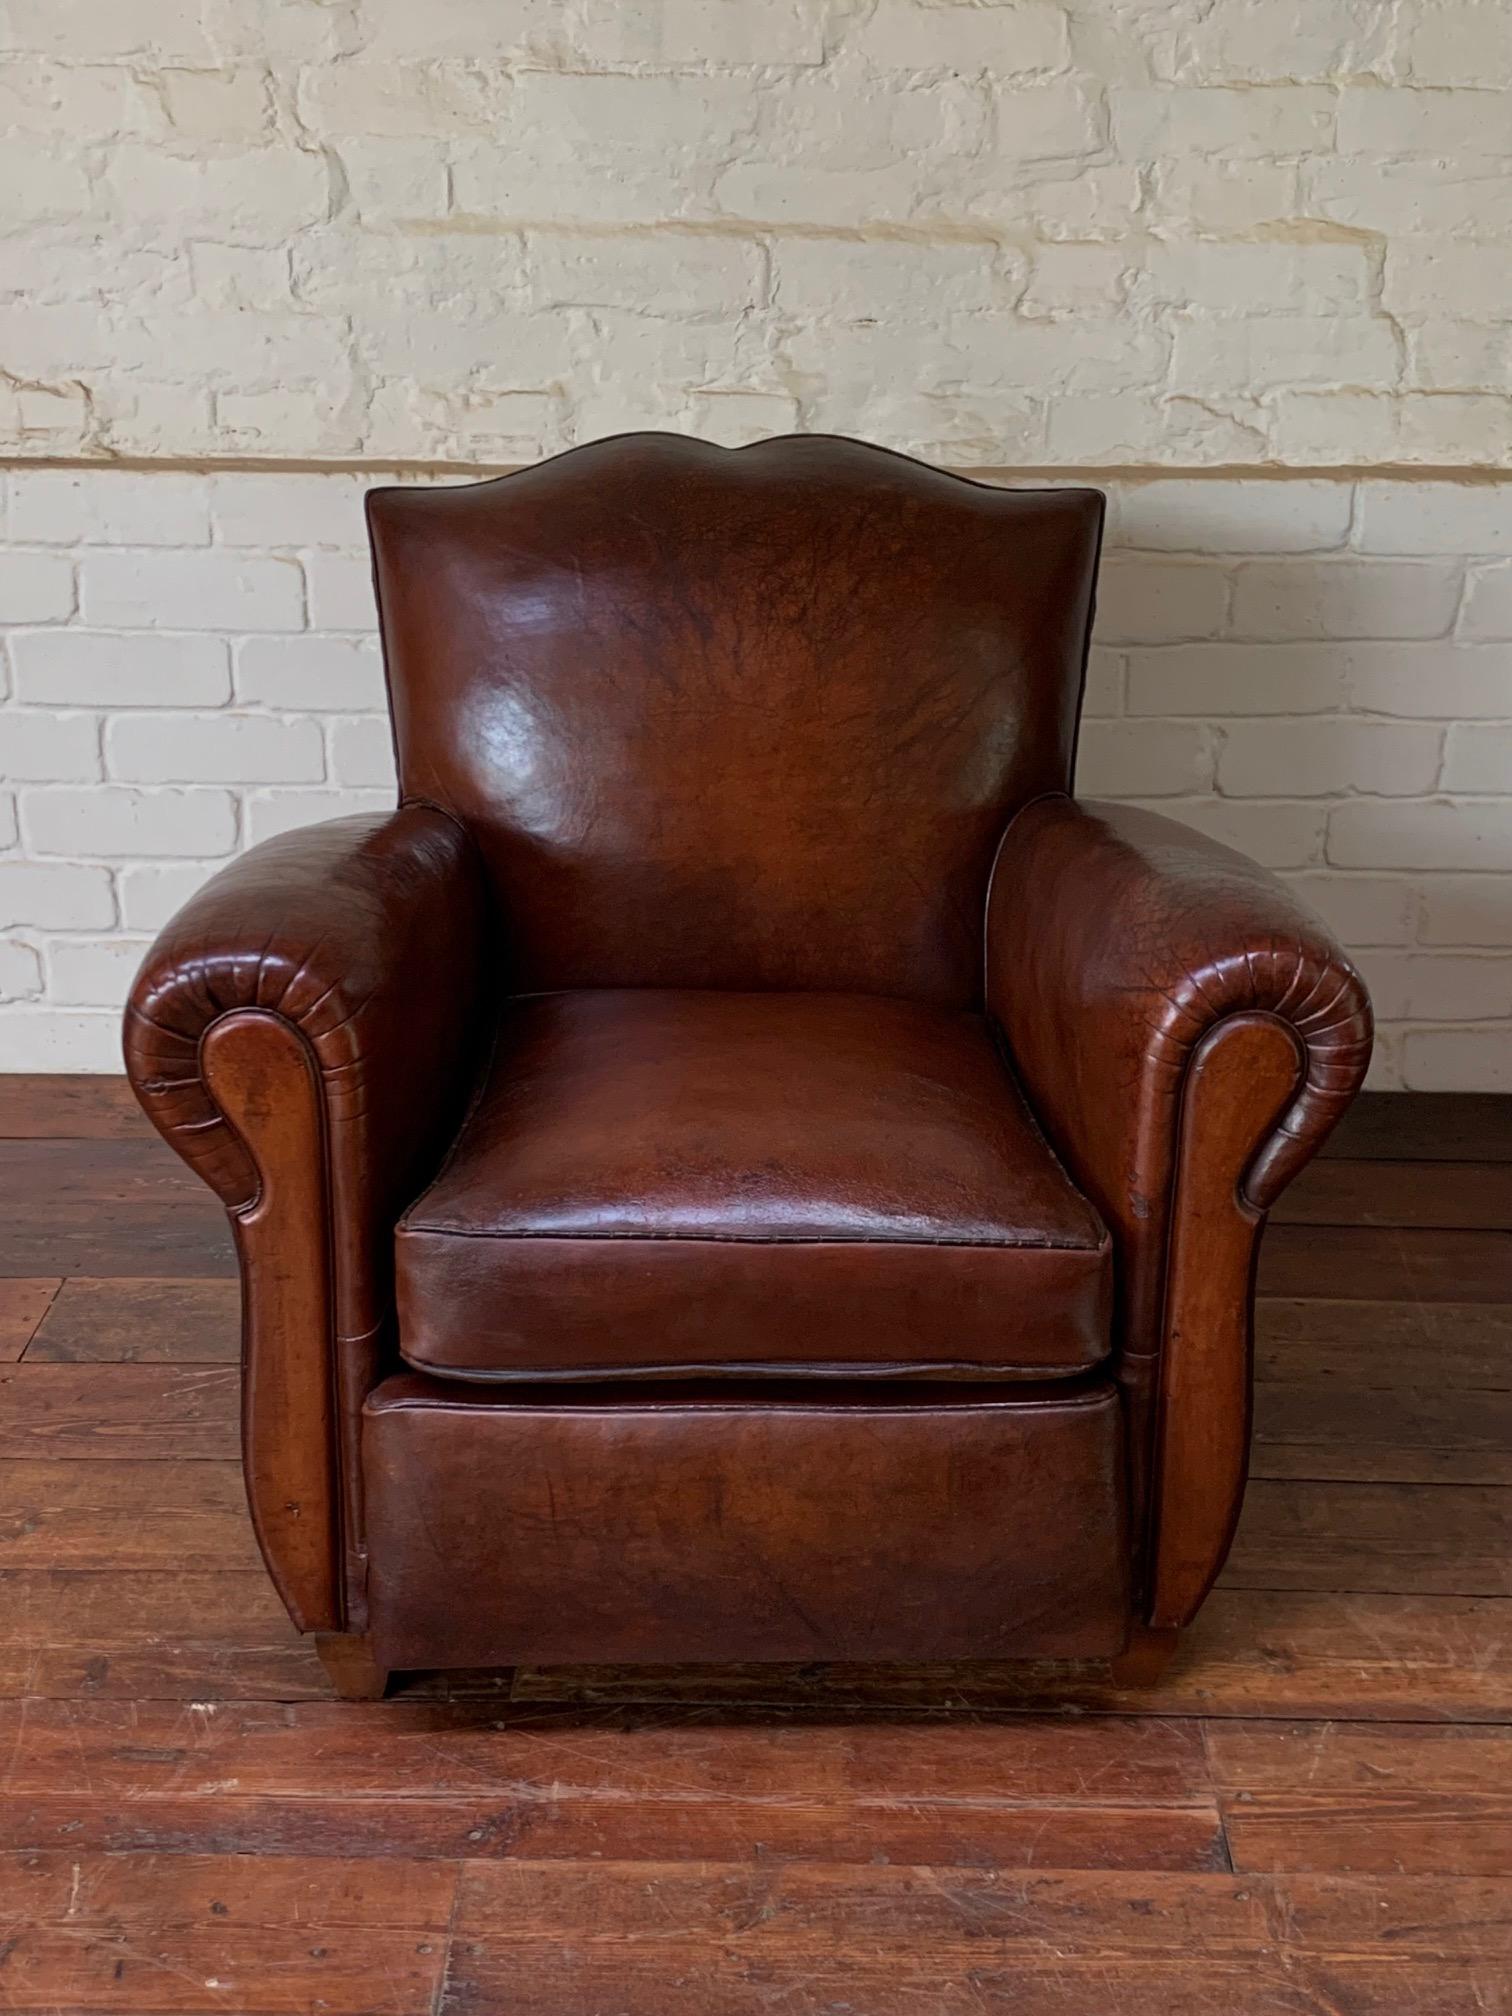 What a beautiful chair. The rich Havana brown leather, with its soft, waxy patina is just in beautiful condition. The chair itself is a very beautiful model and has some very nice design details that make it quite a stylish piece. All the necessary